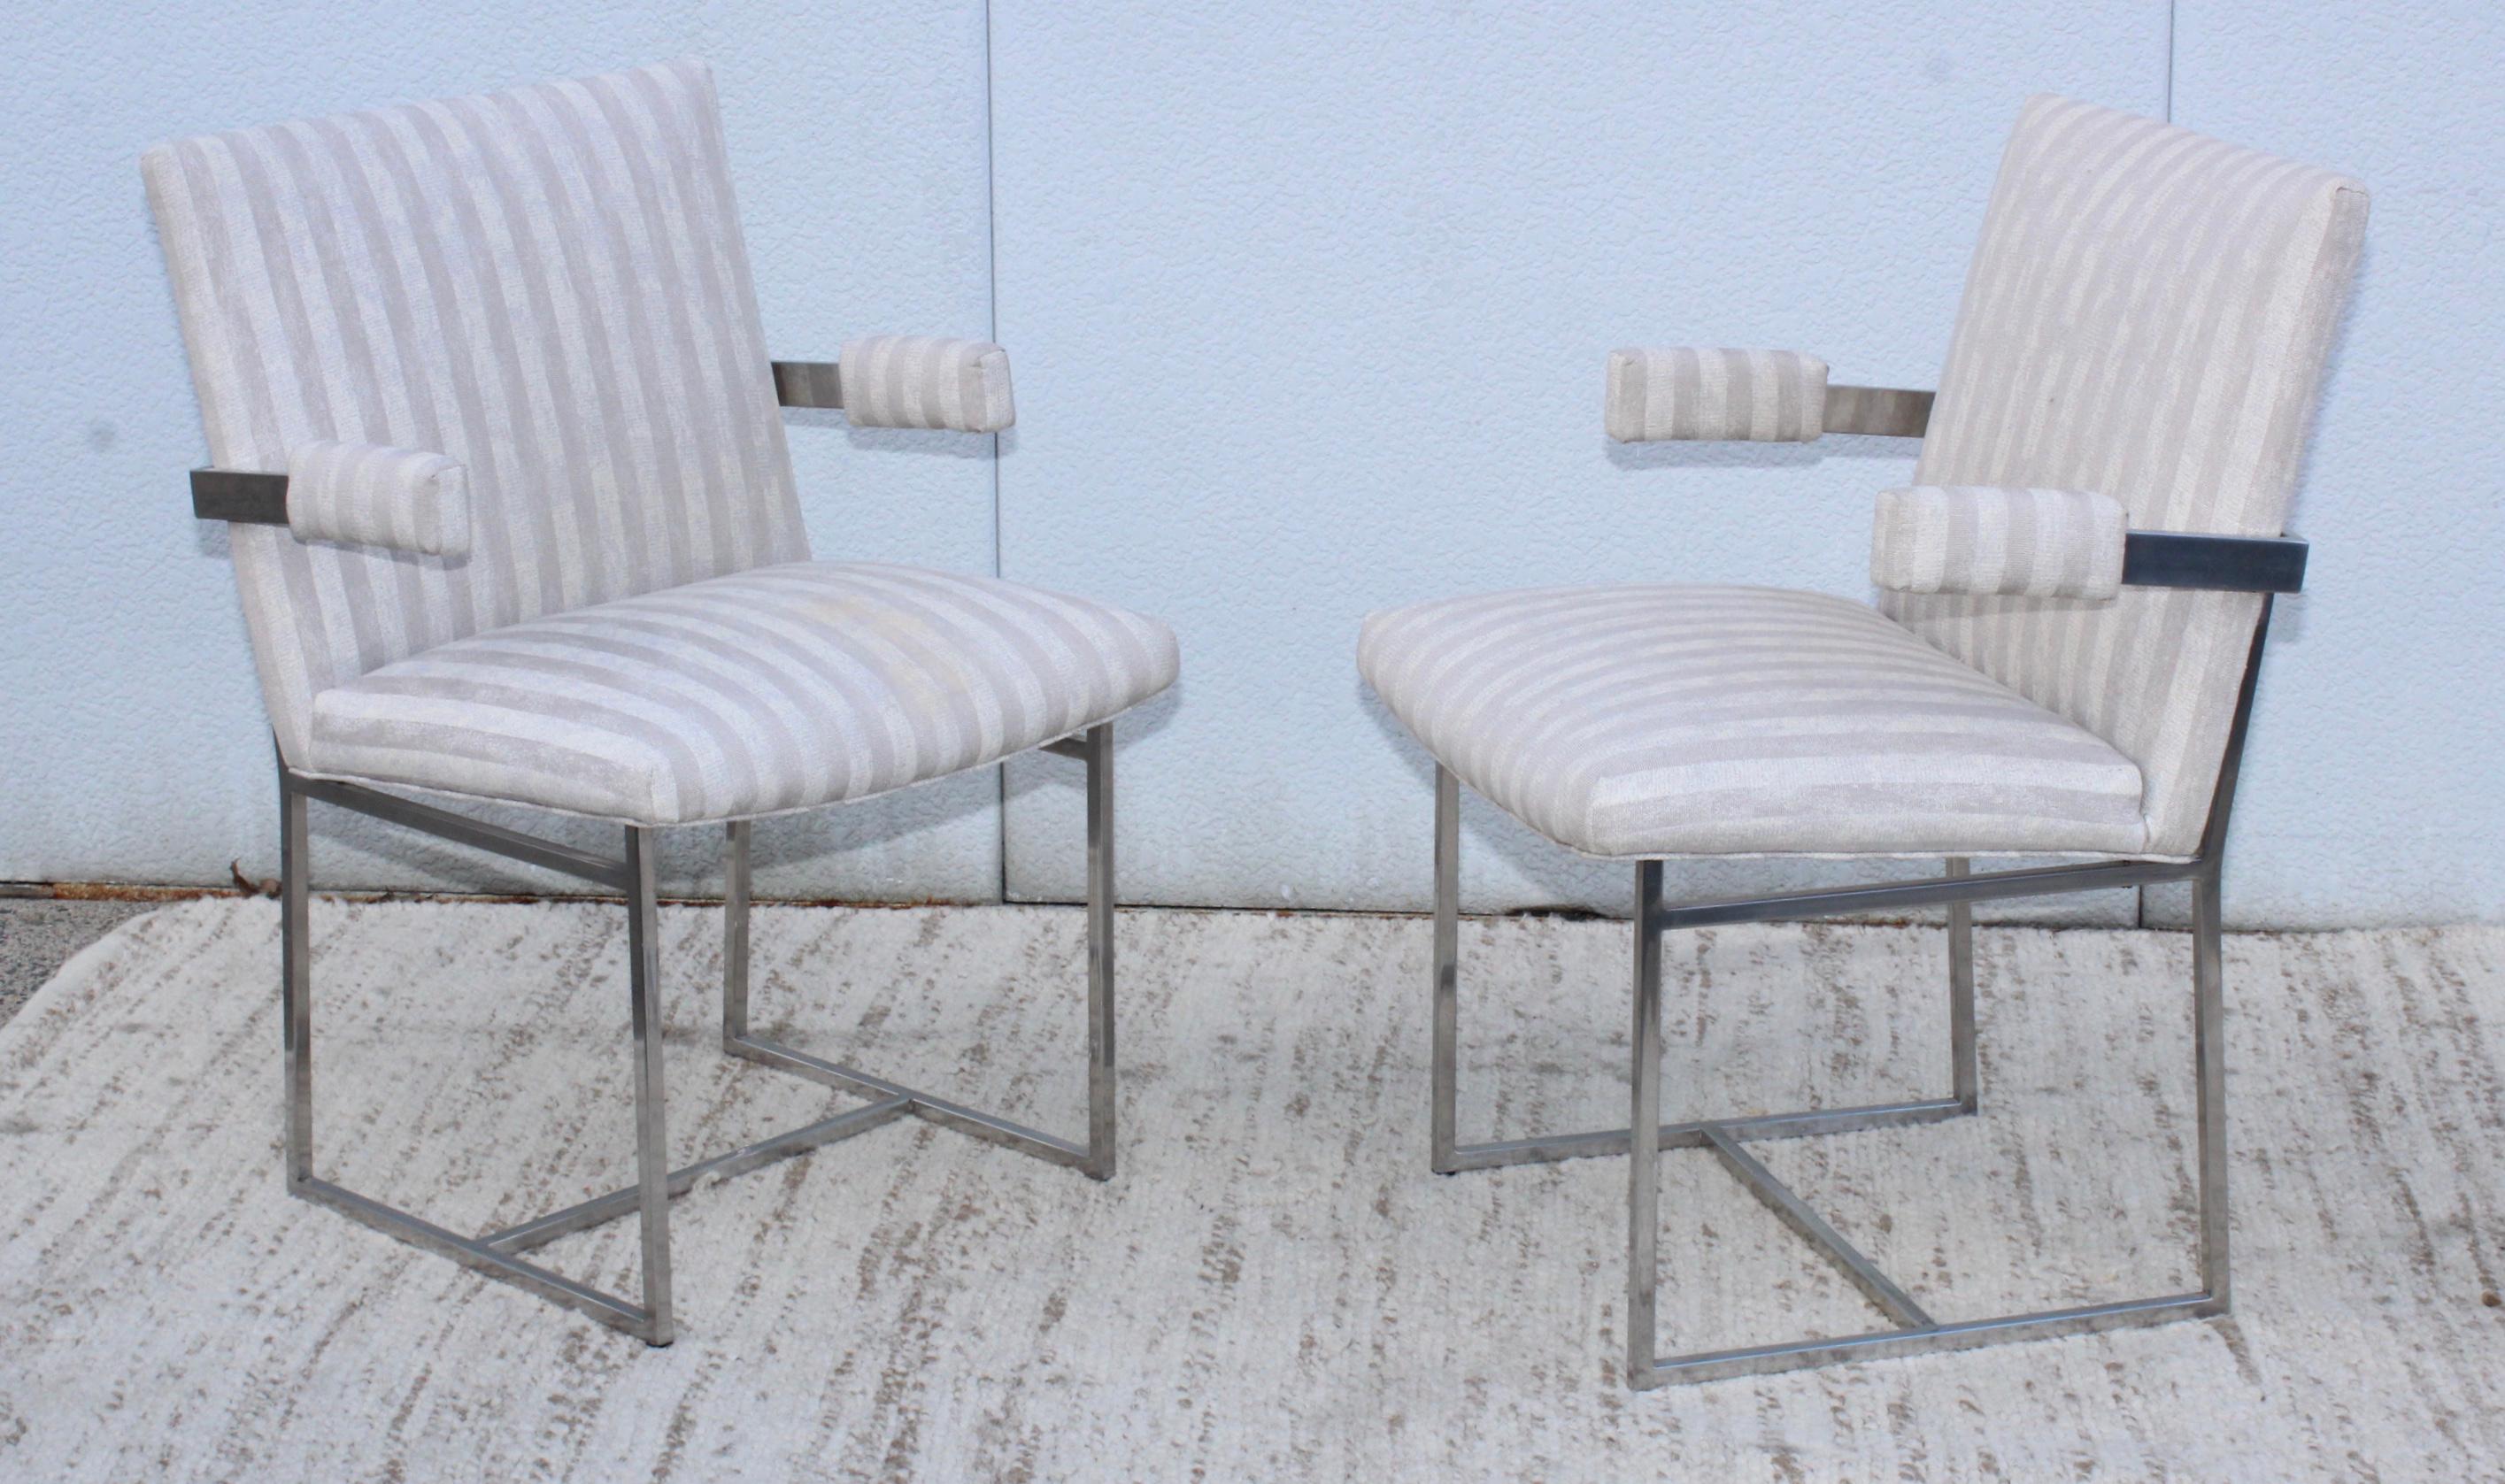 1970's Mid-Century Modern chrome side chairs designed by Milo Baughman for Thayer Coggin, in vintage original condition with minor wear and patina, they need new upholstery.